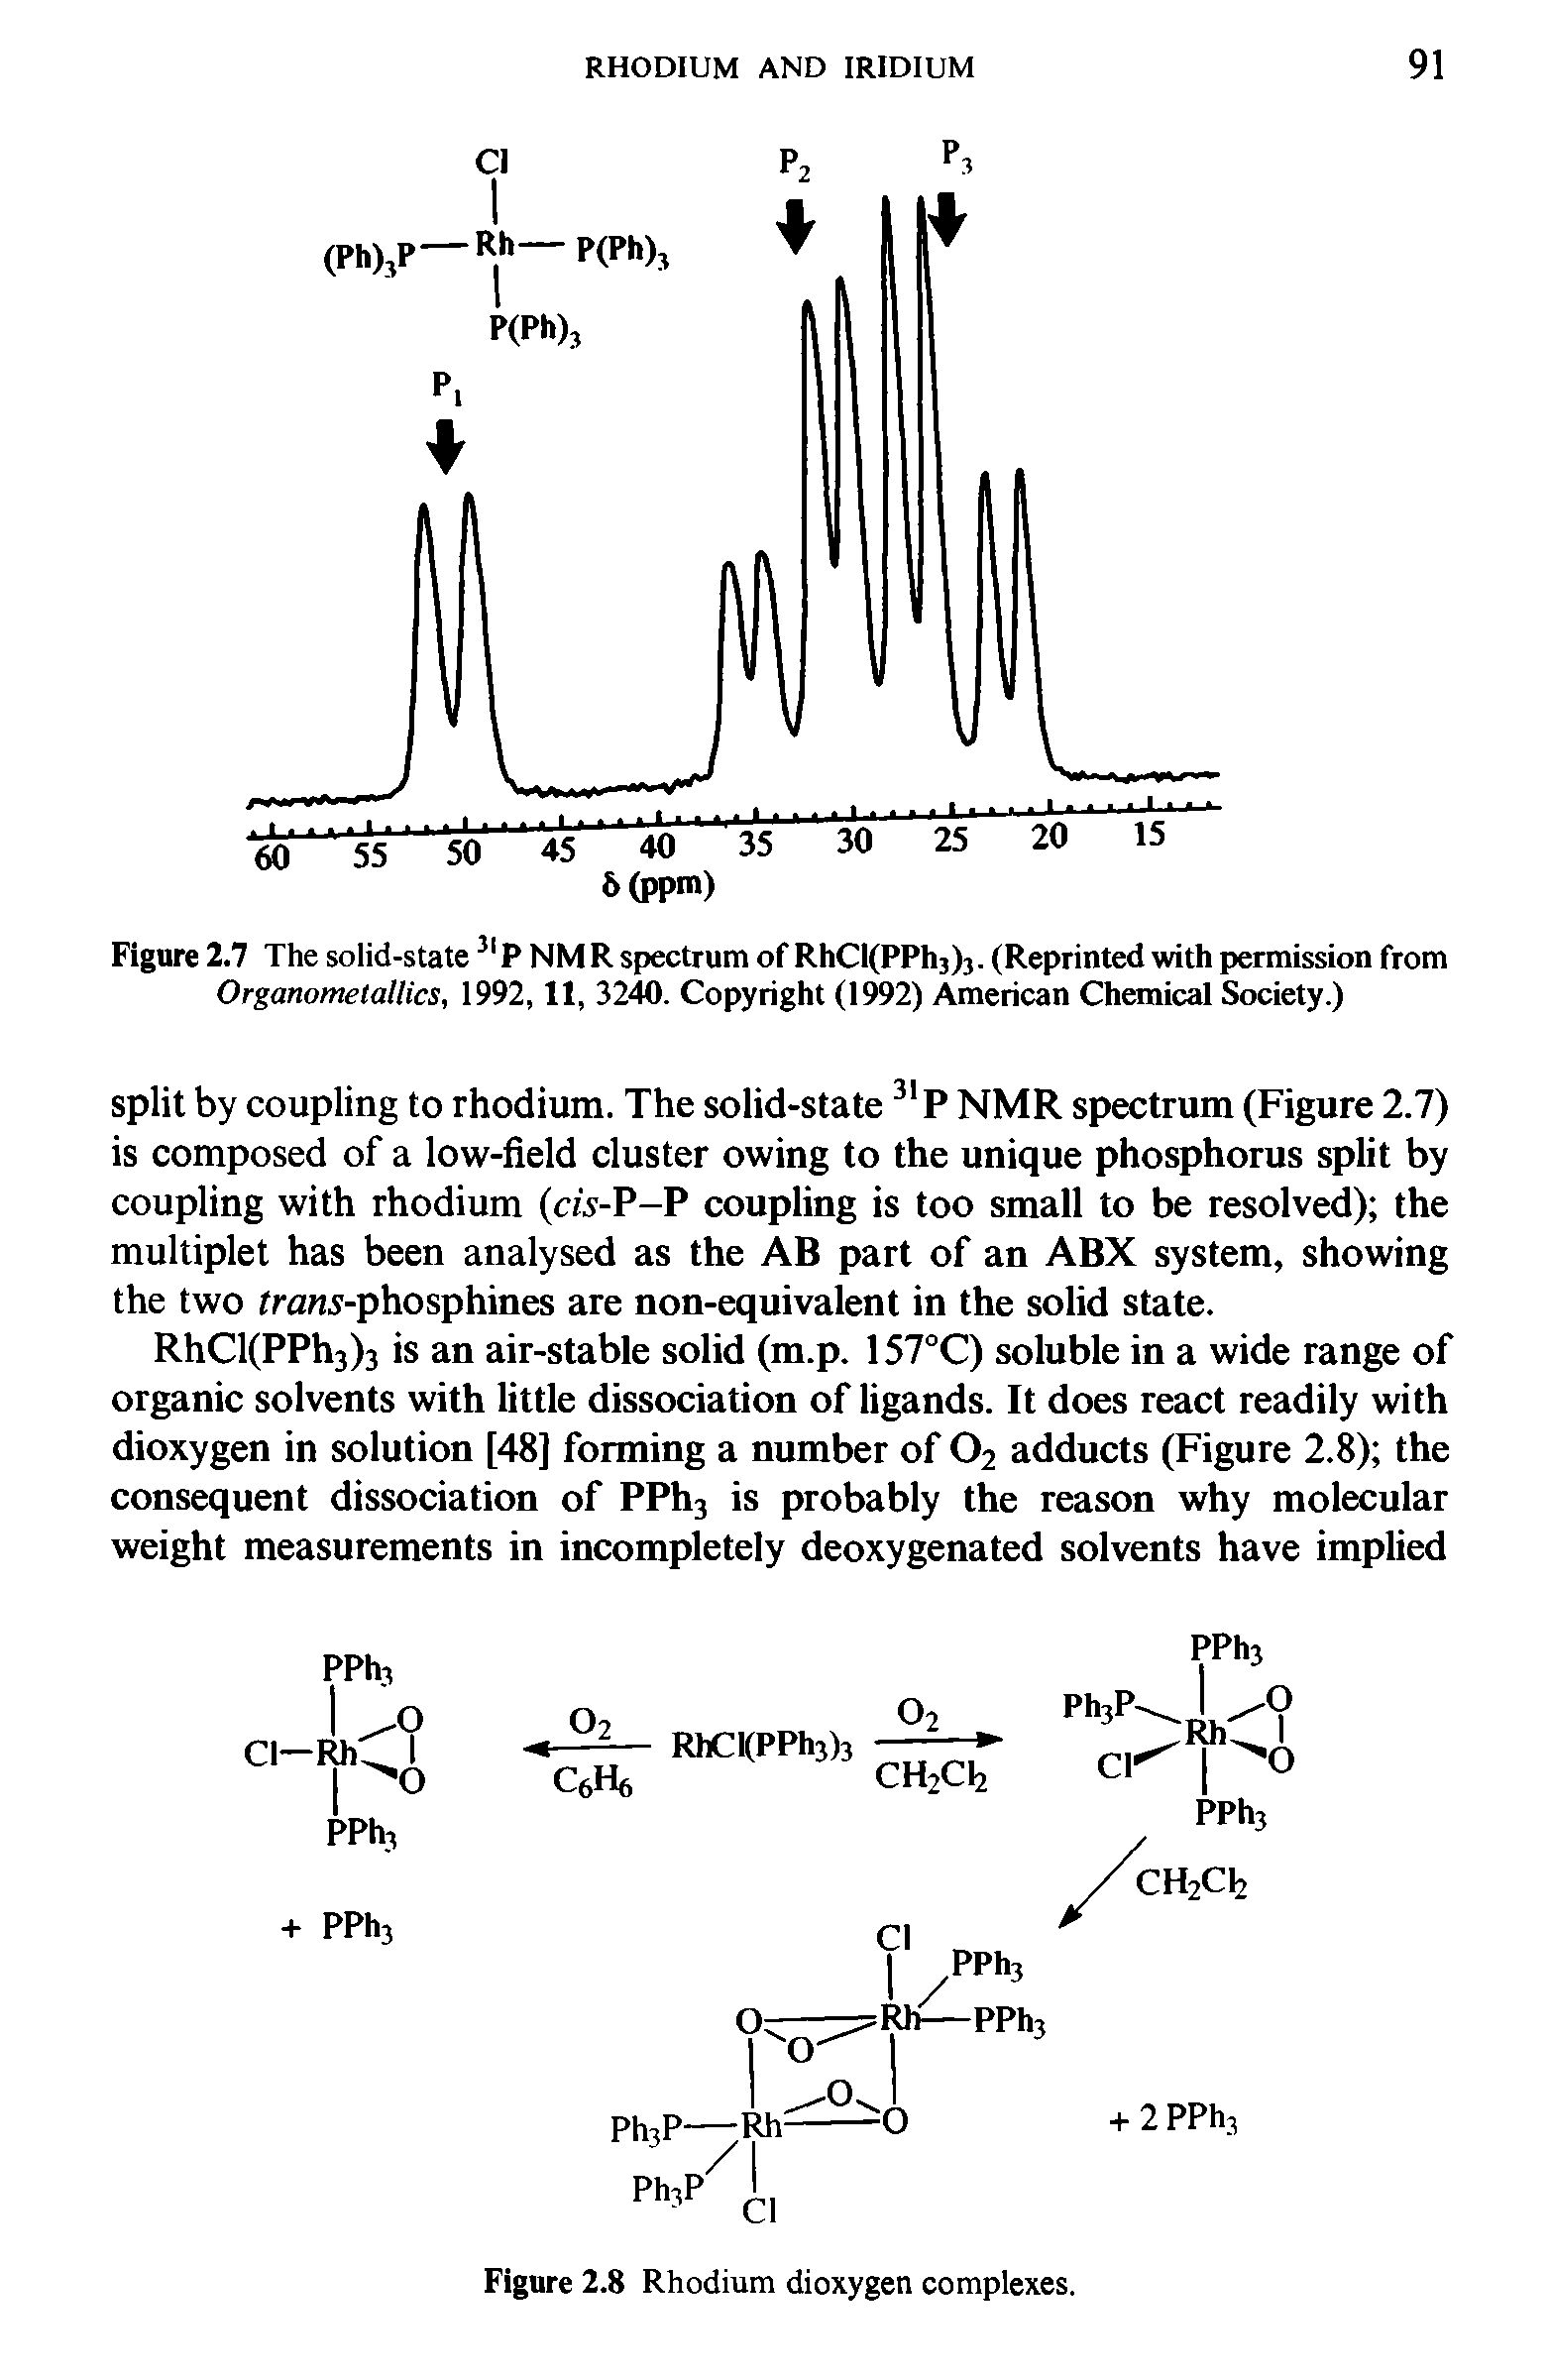 Figure 2.7 The solid-state31P NM R spectrum of RhCl(PPh3)j. (Reprinted with permission from Organometallics, 1992,11, 3240. Copyright (1992) American Chemical Society.)...